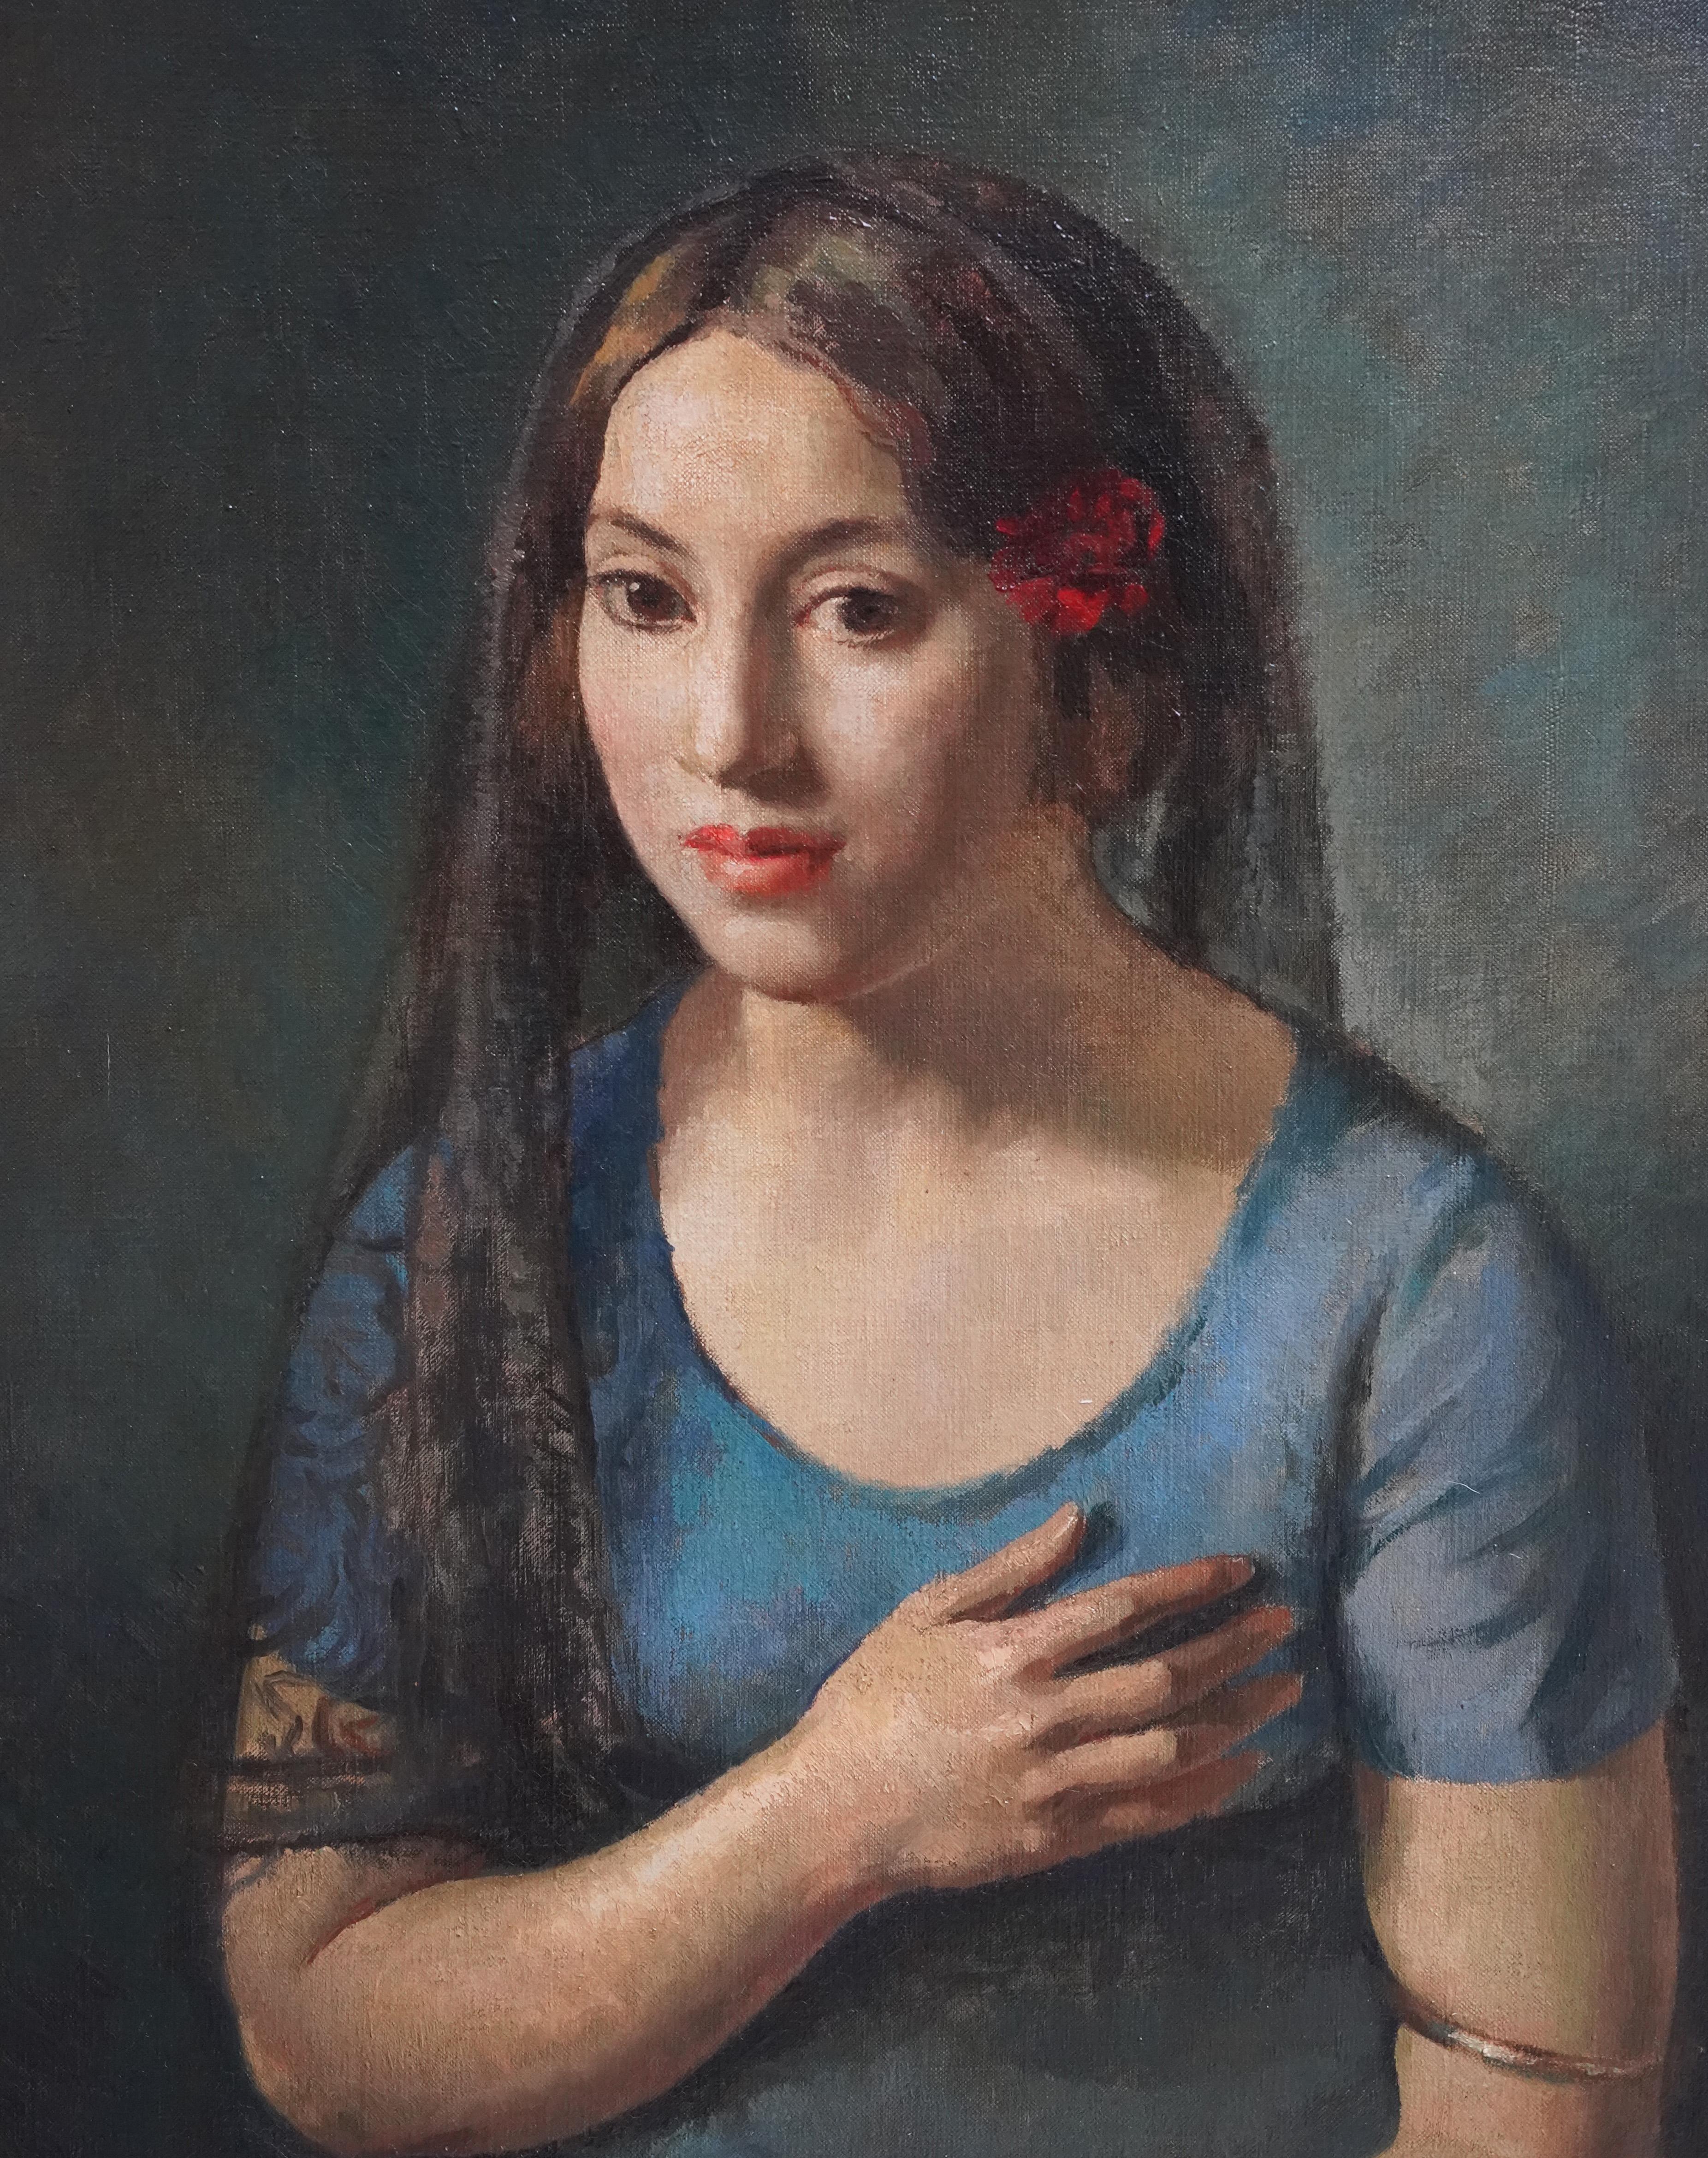 This lovely British portrait oil painting is by noted artist Lionel Ellis. The painting comes from a collection of works by the artist, previously owned by his wife. Painted circa 1930, the composition is a seated portrait of a girl in a blue dress